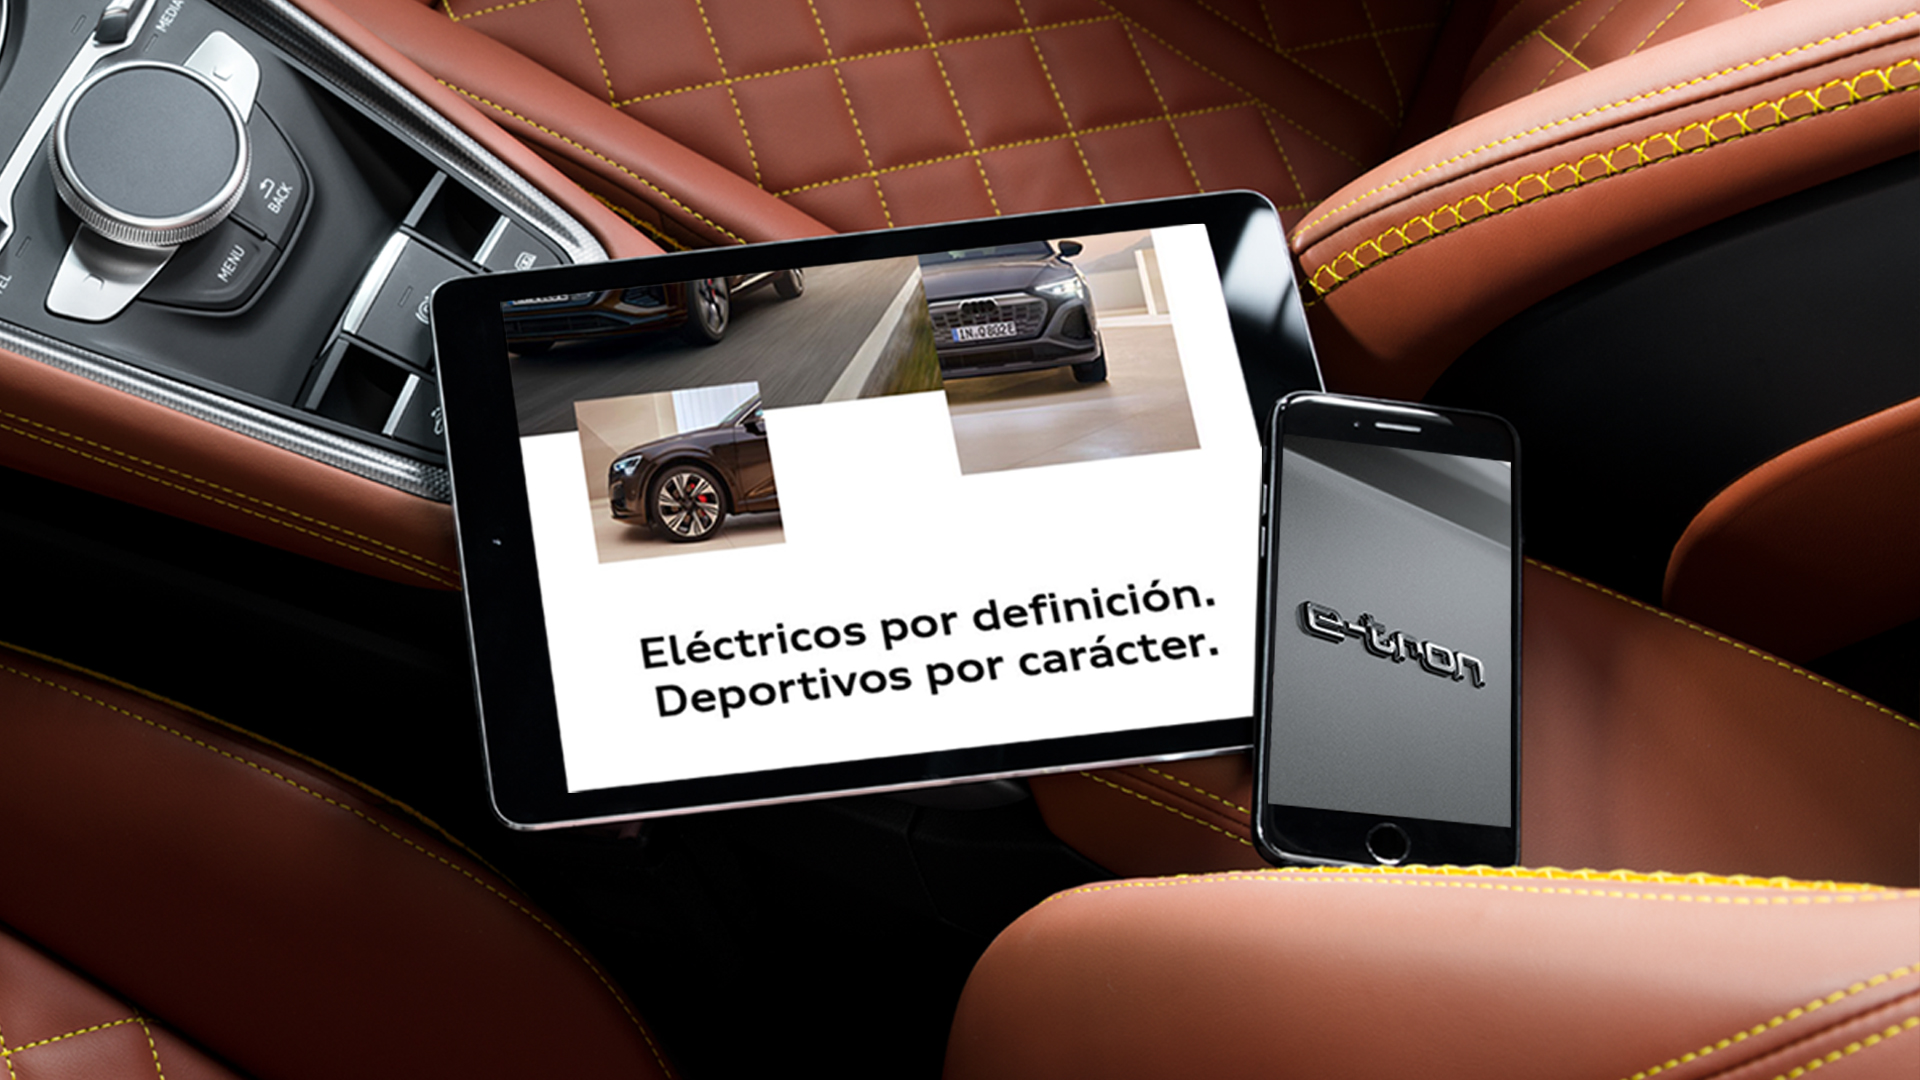 stage-audi-newsletter-e-tron-electricos-1920x1080-mobile.jpg